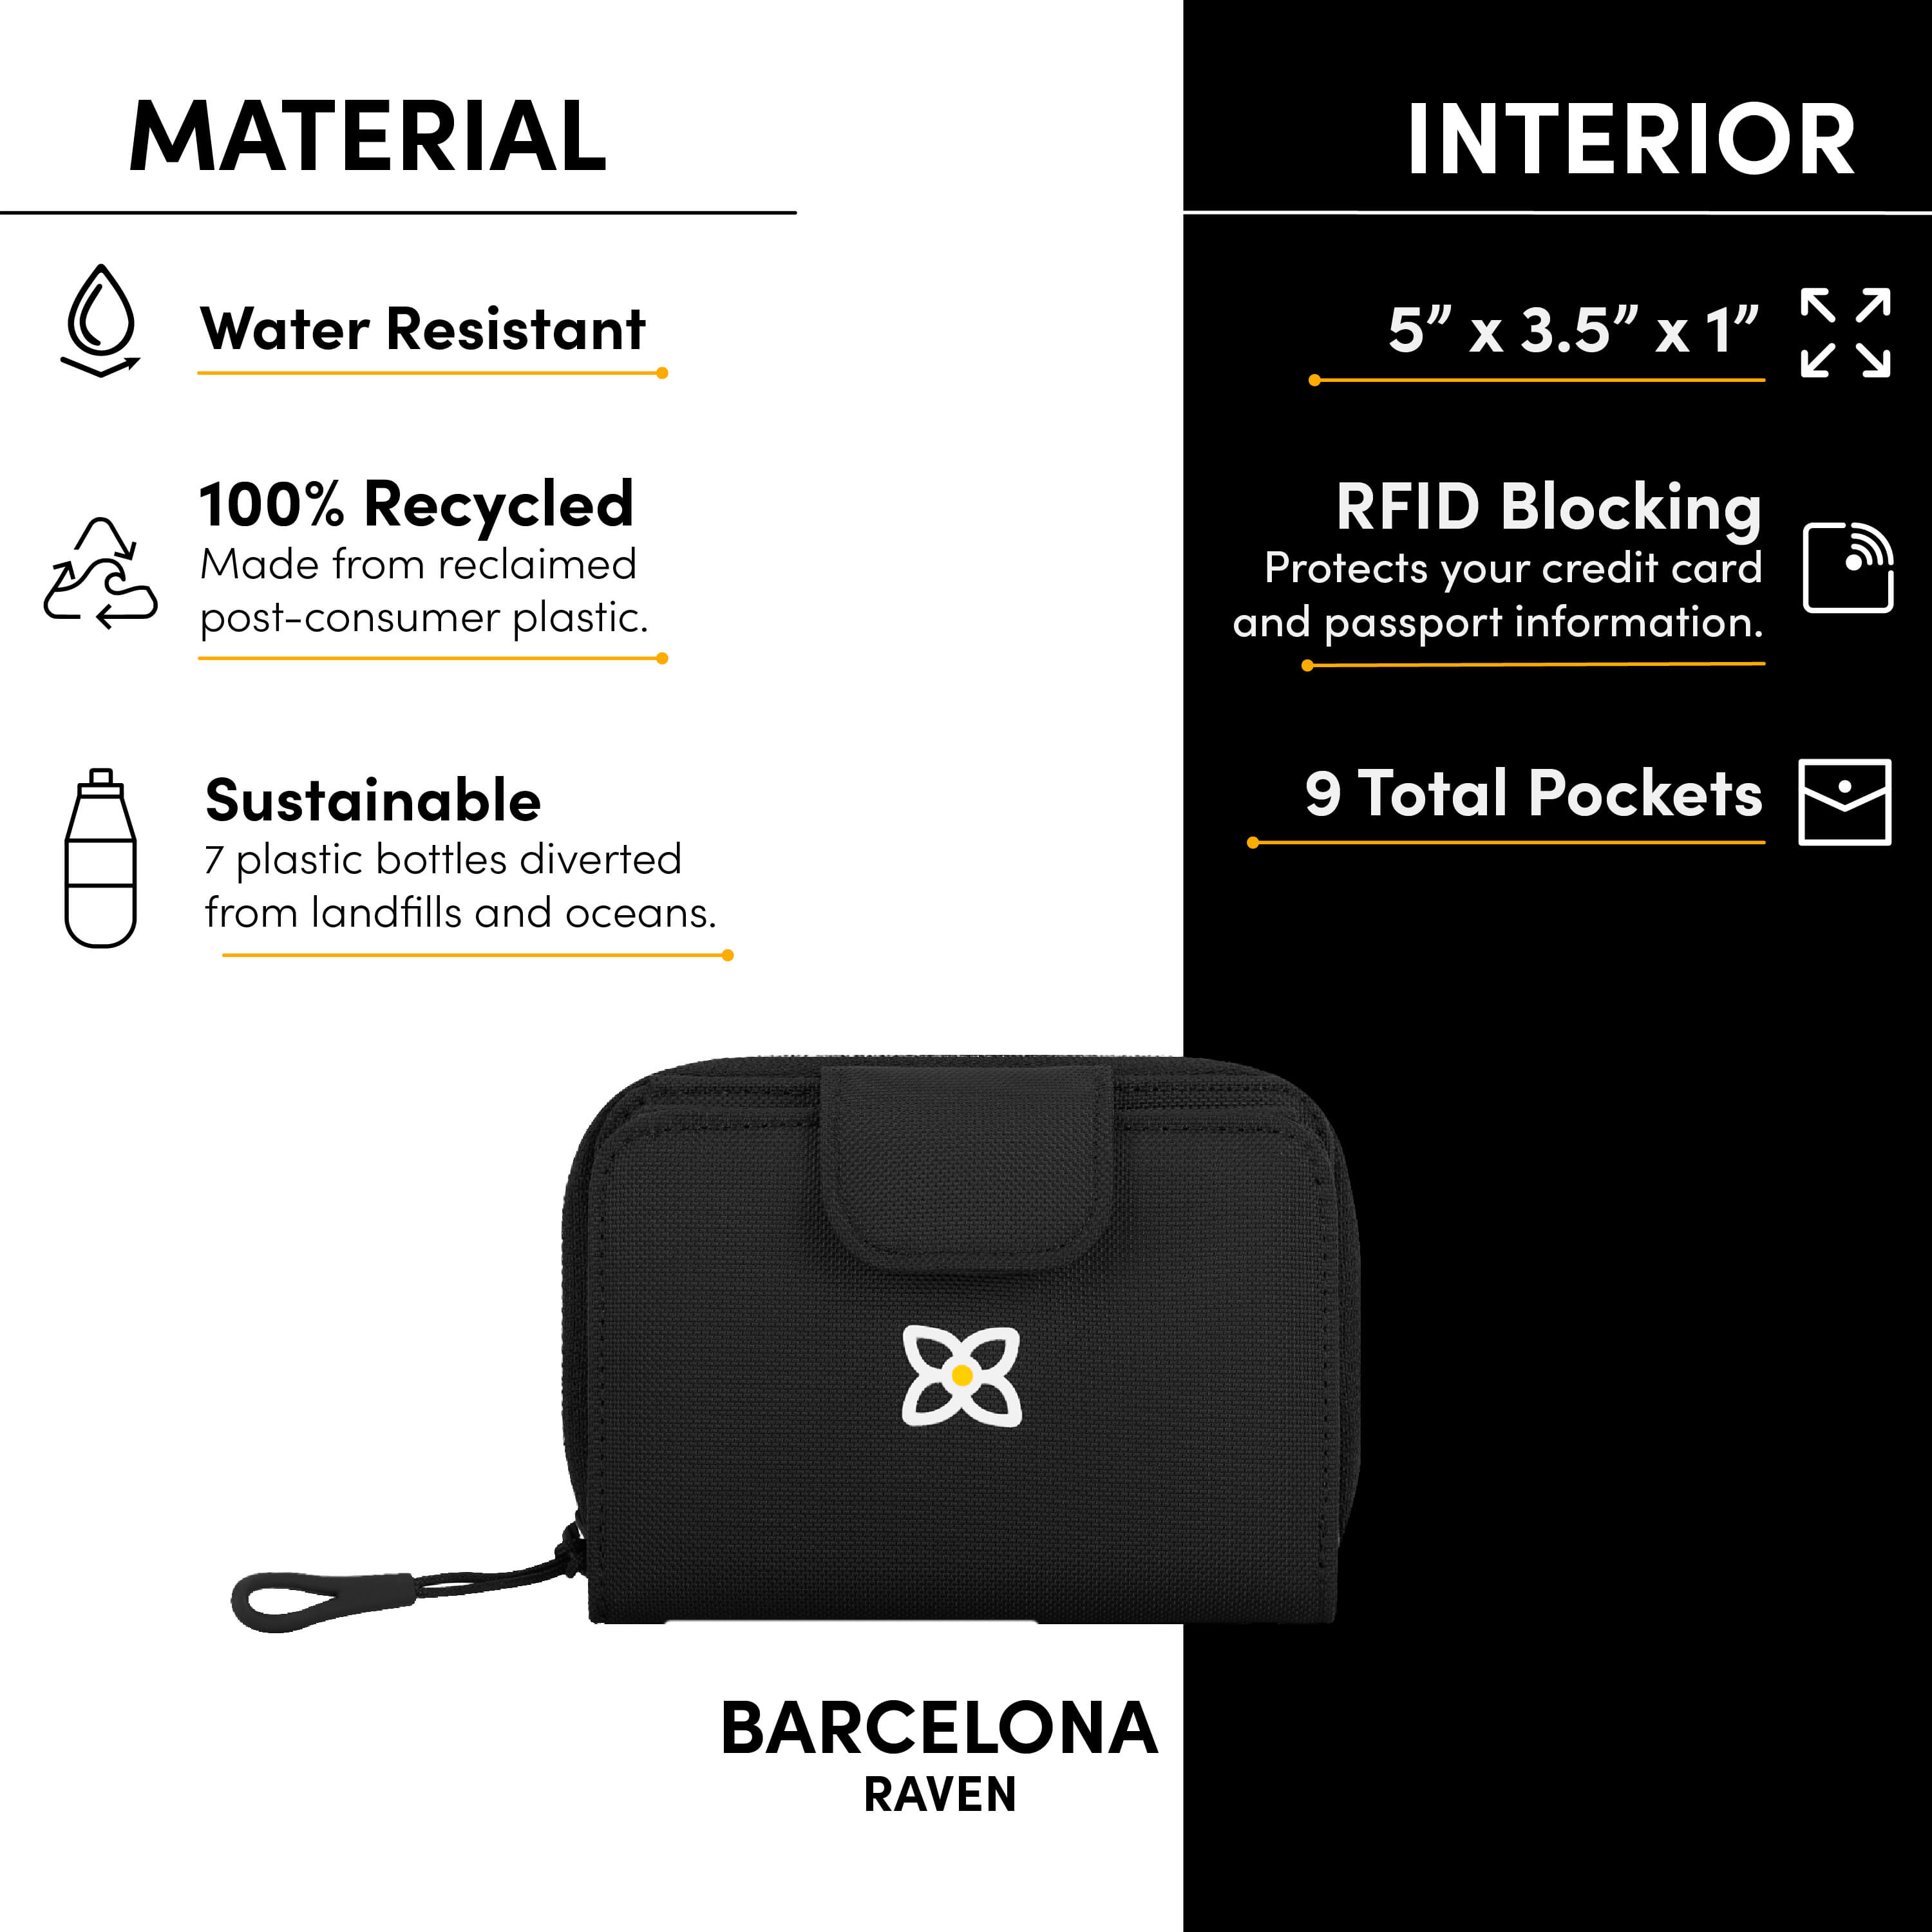 Graphic showcasing the following features of Sherpani women&#39;s RFID wallet, the Barcelona: water-resistant material, sustainably made from repurposed plastic bottles, built-in RFID security, nine total pockets.